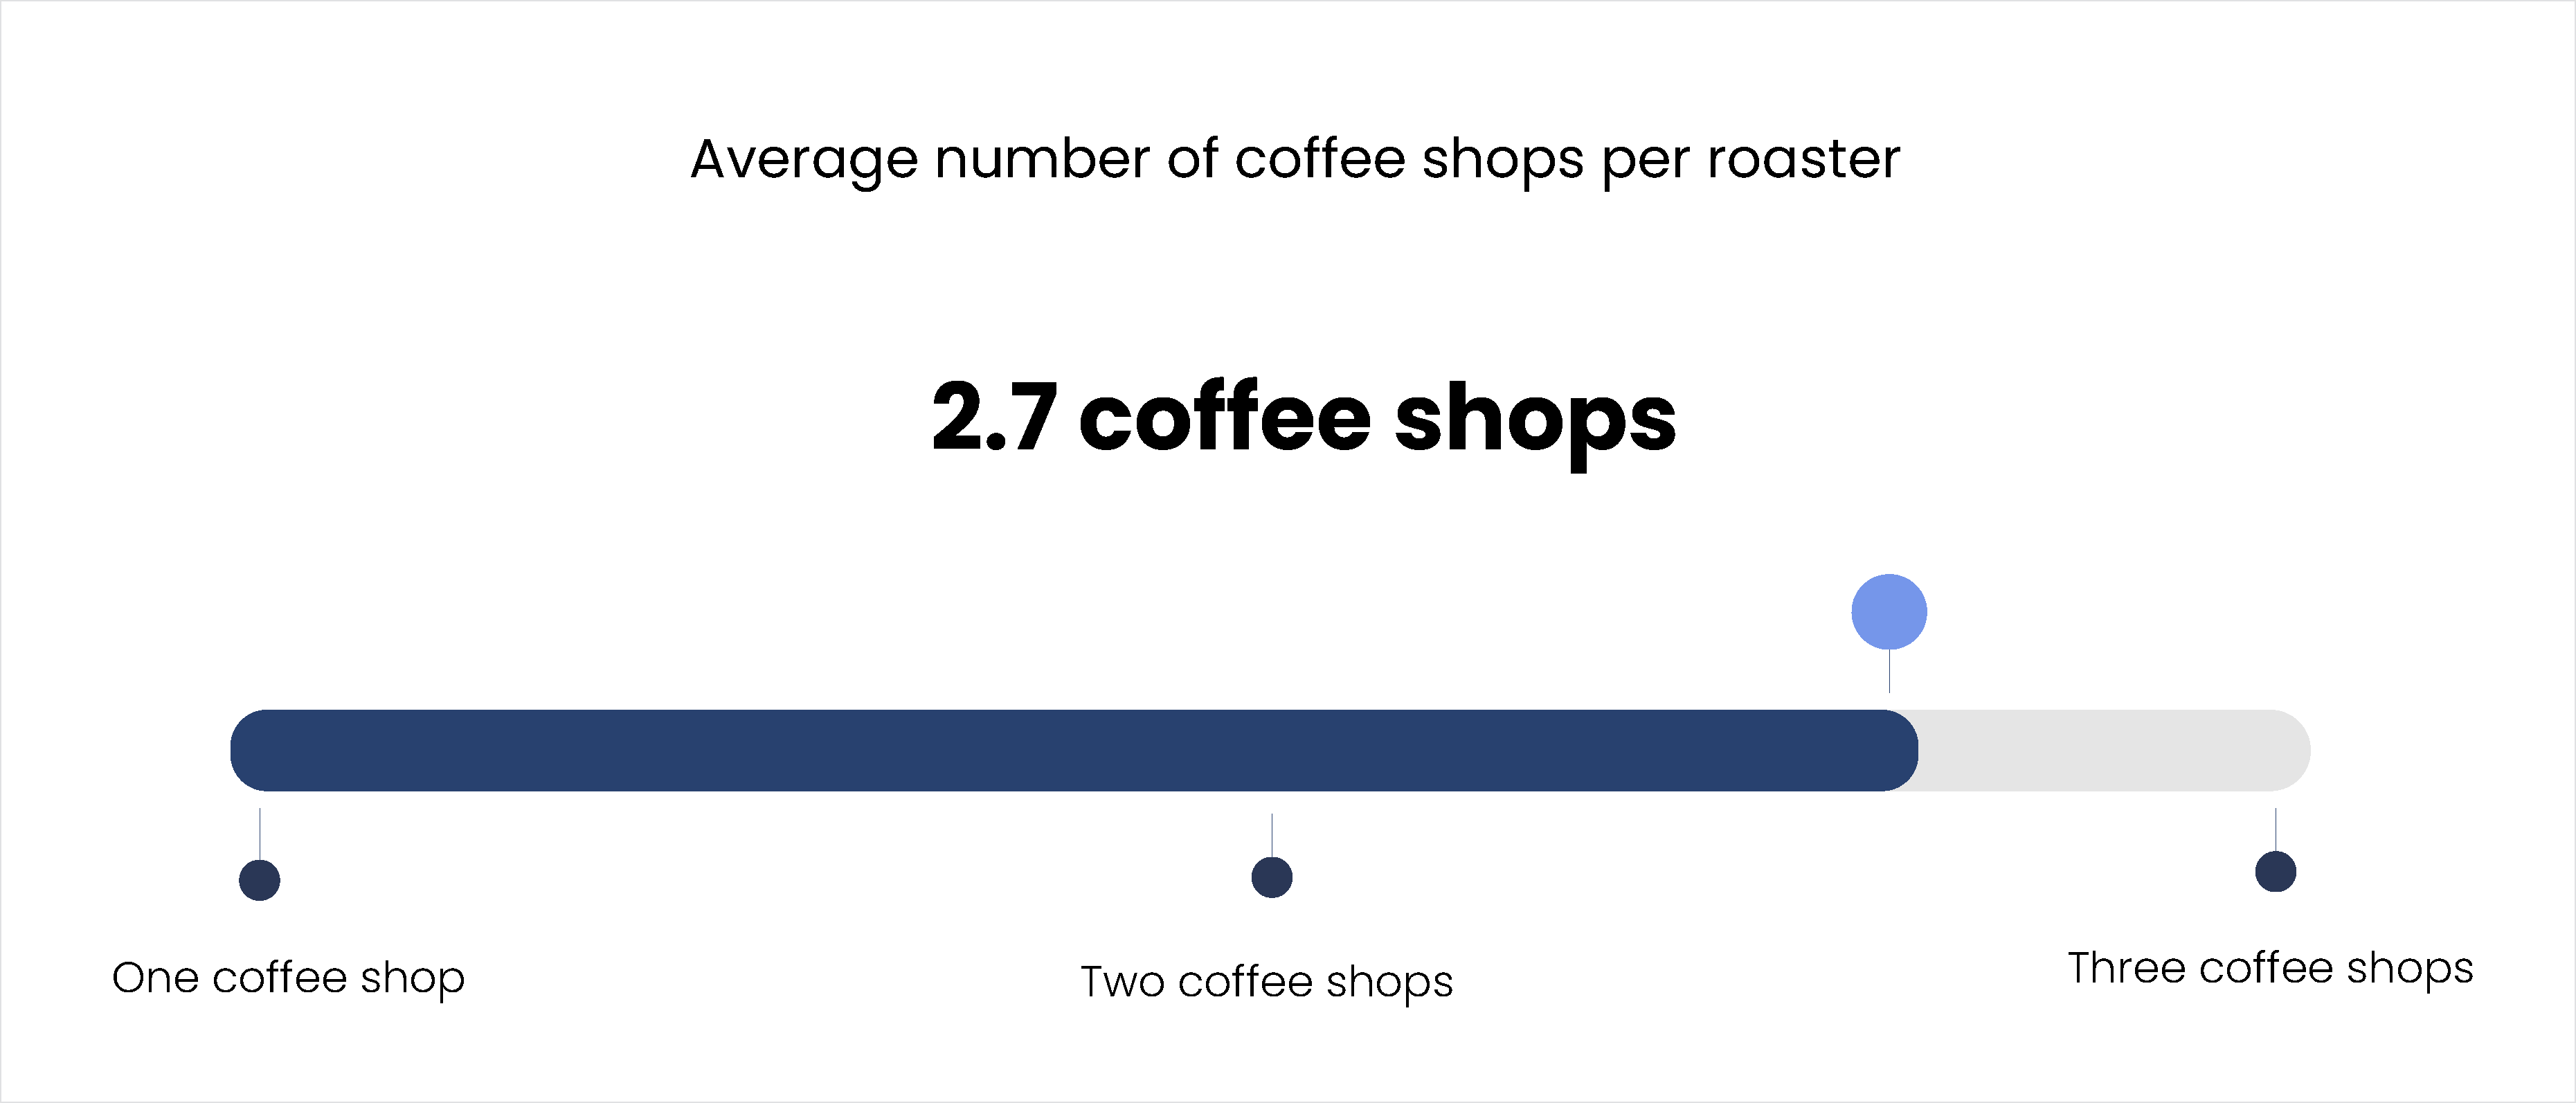 Average number of coffee shops per roaster